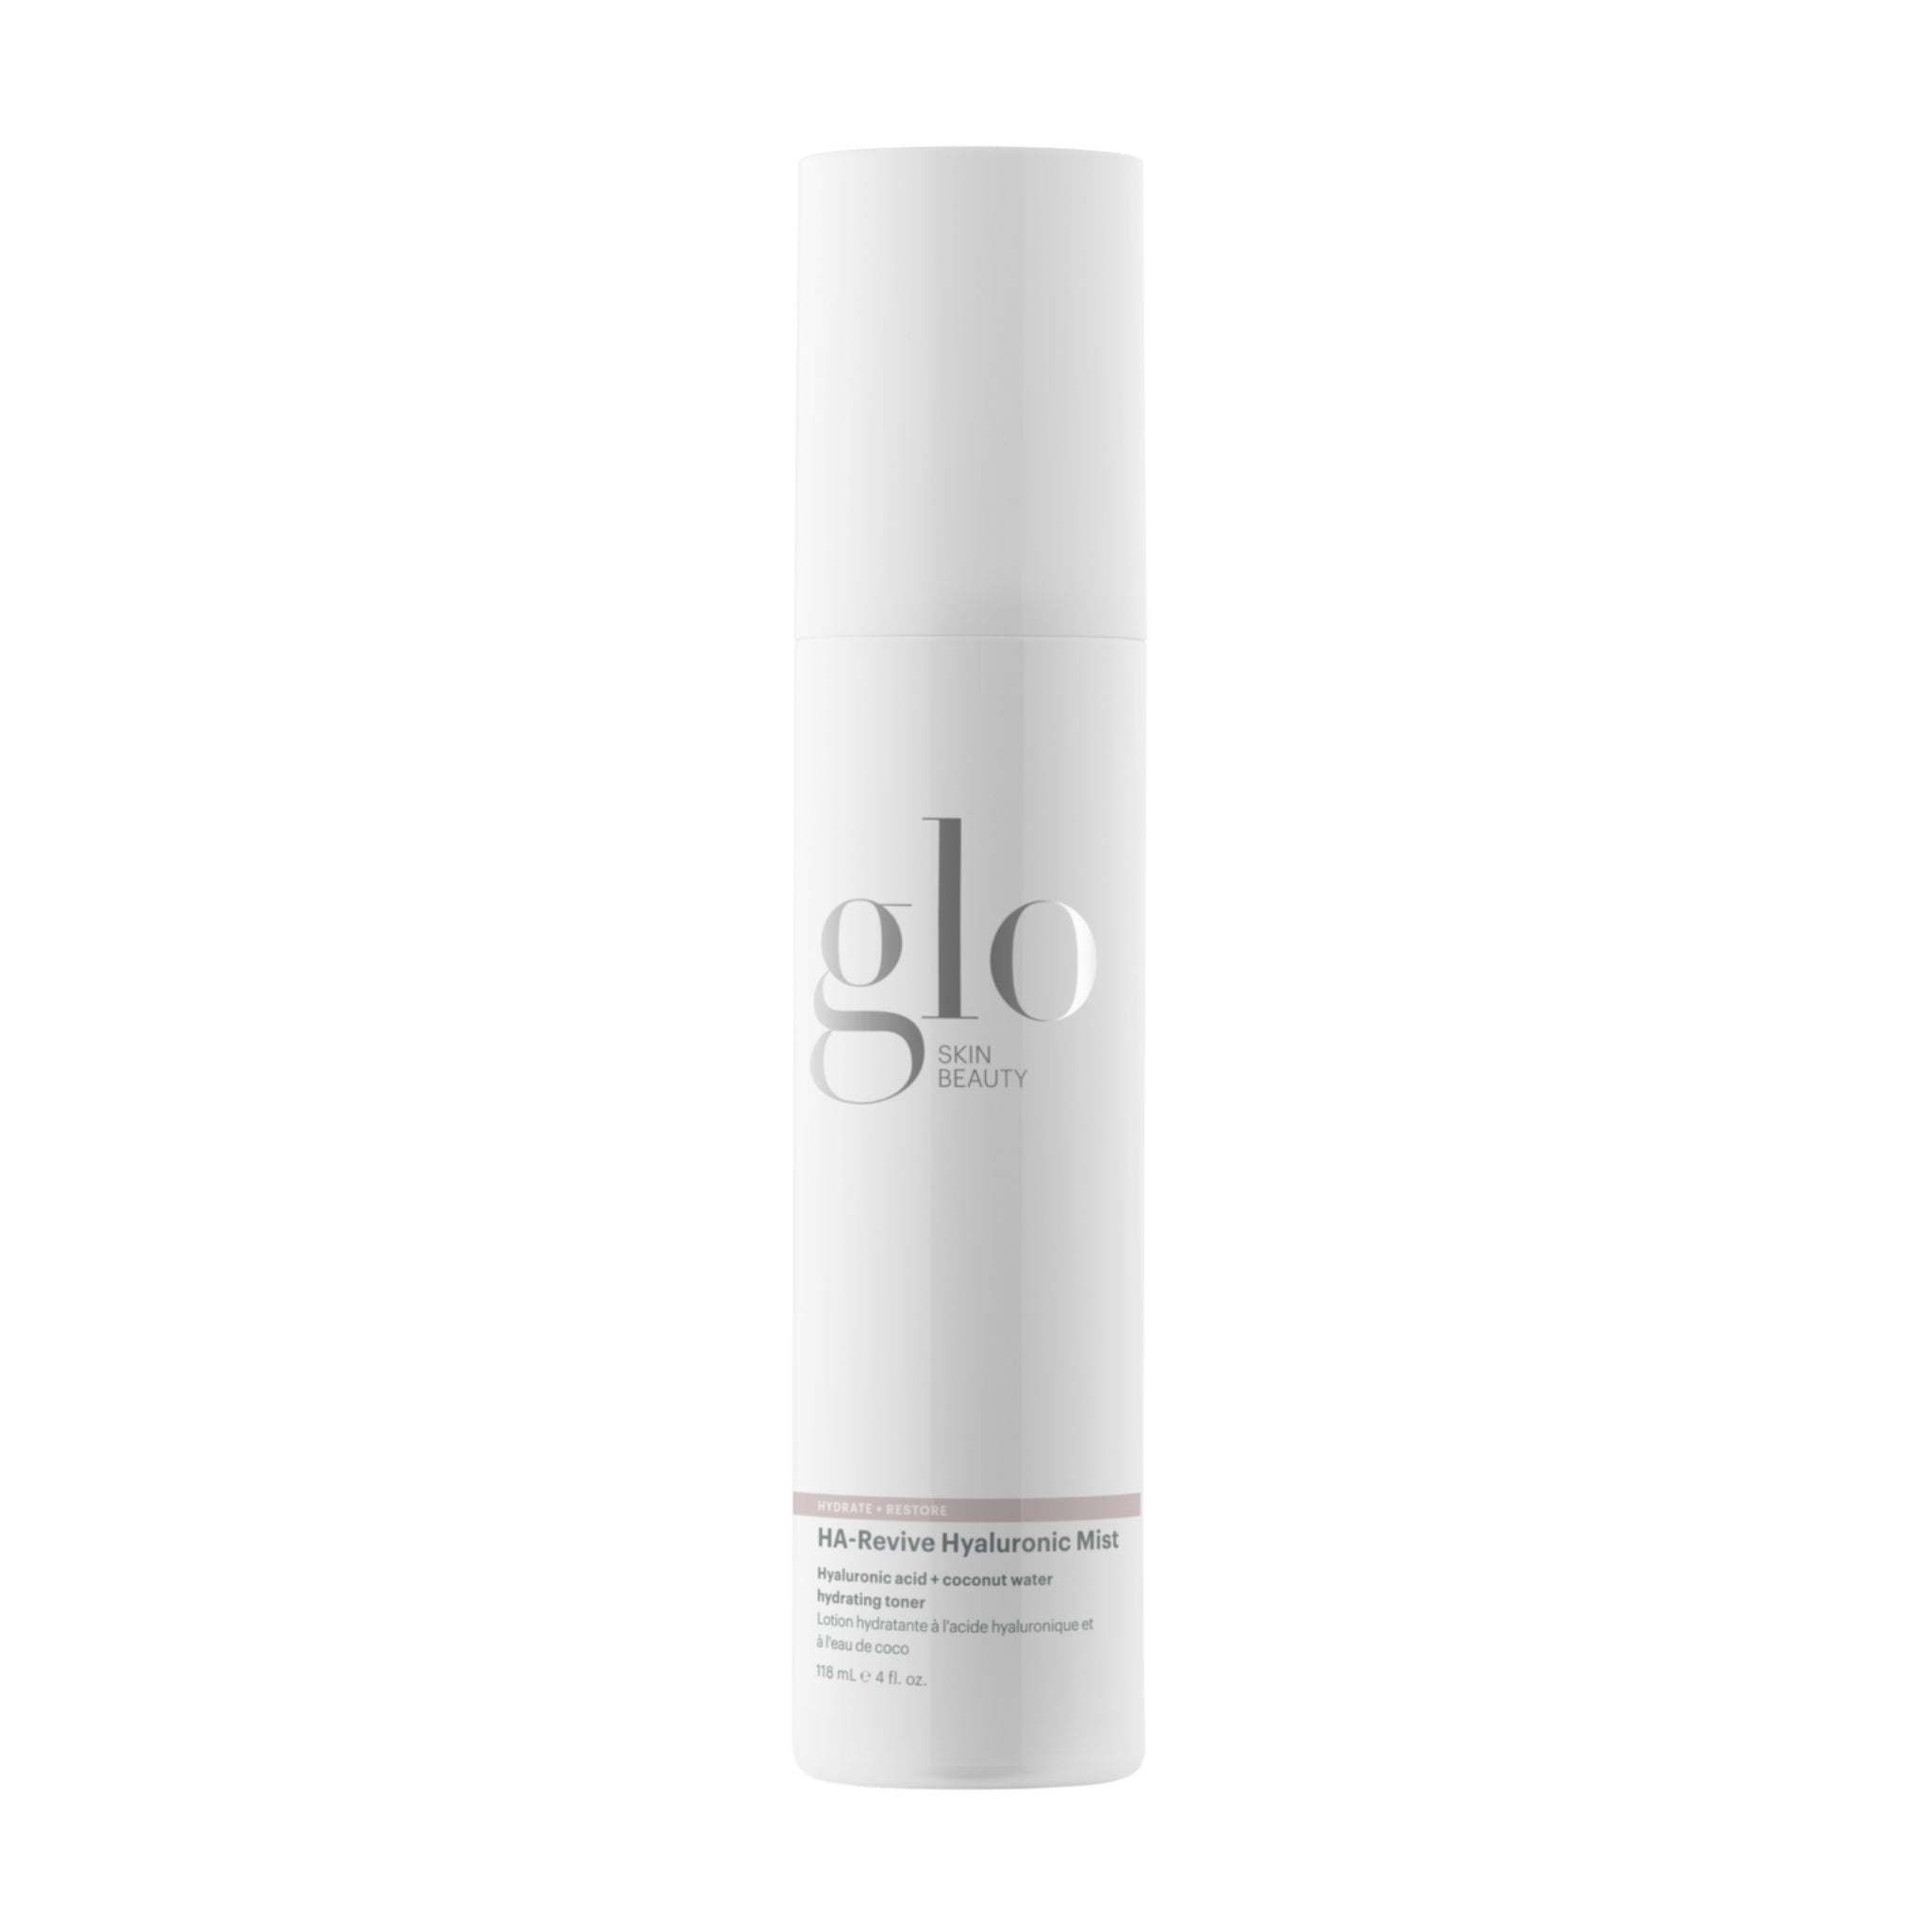 Glo Skin Beauty - HA-Revive Hyaluronic Mist (Formerly: Phyto-Active Toning Mist)